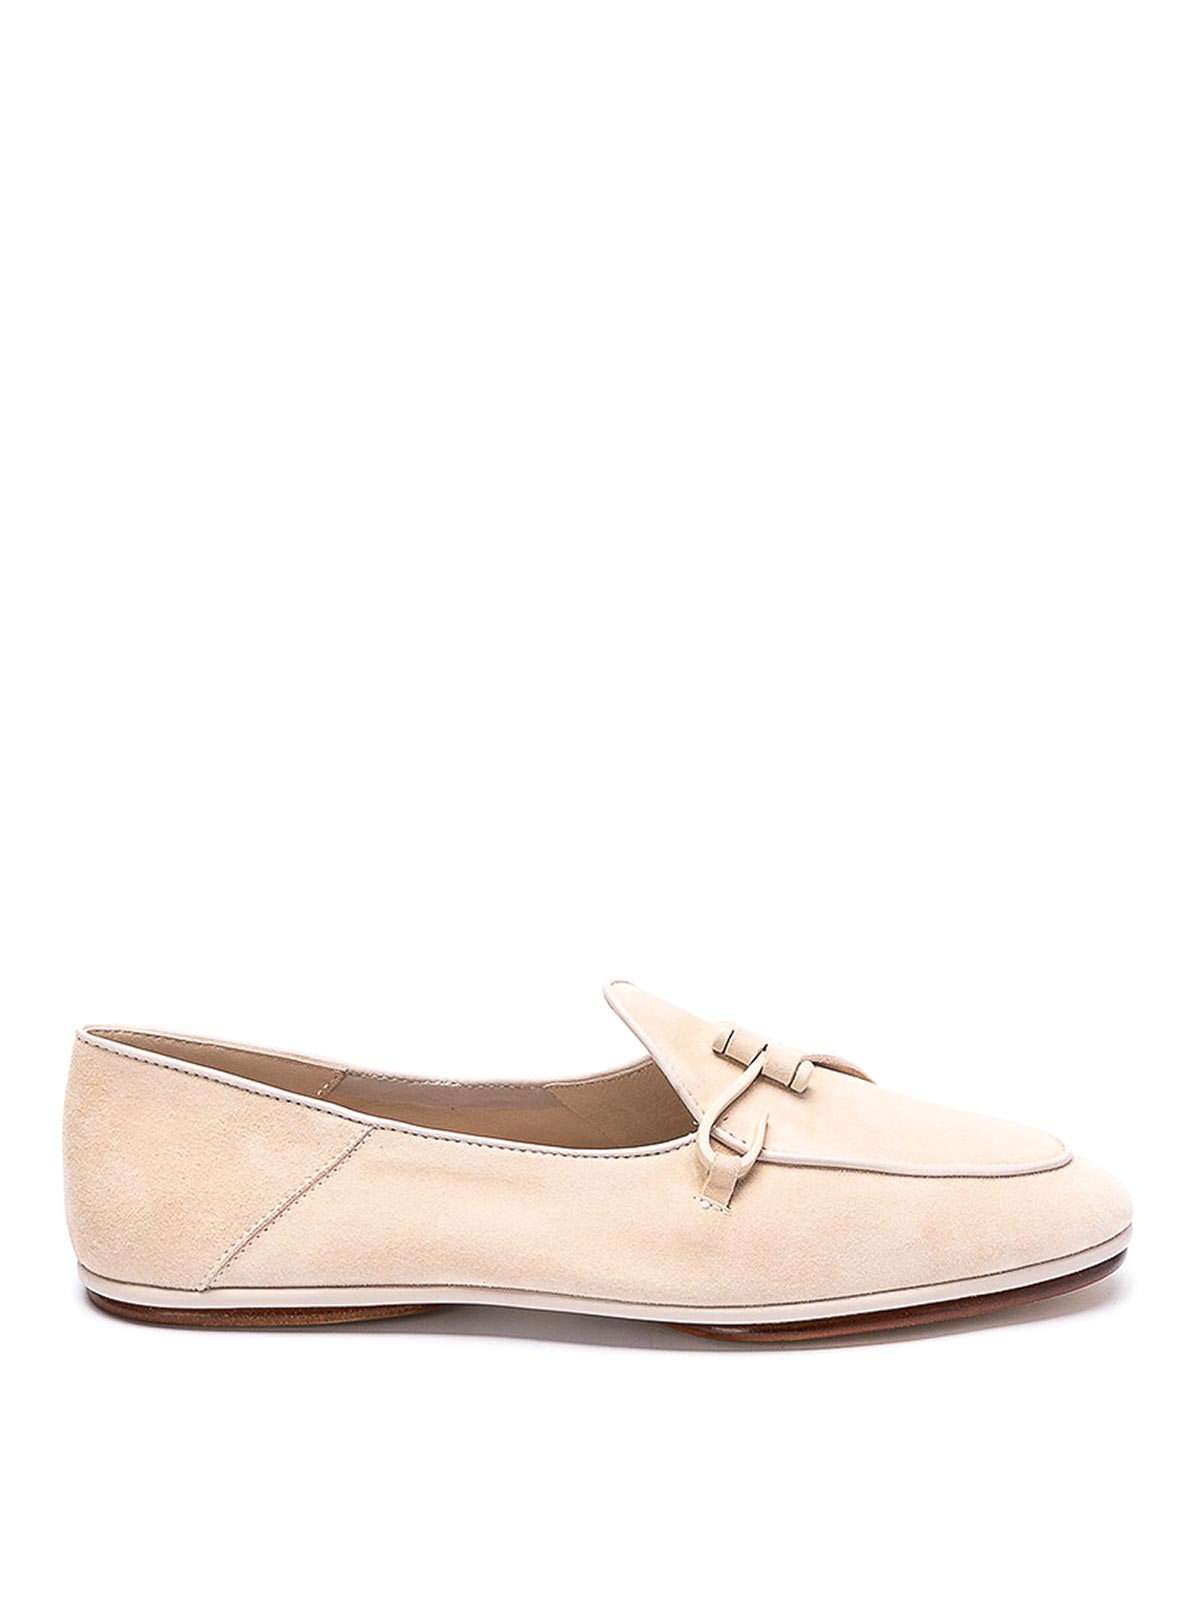 Edhen Milano Comporta Fly Loafers In Neutral